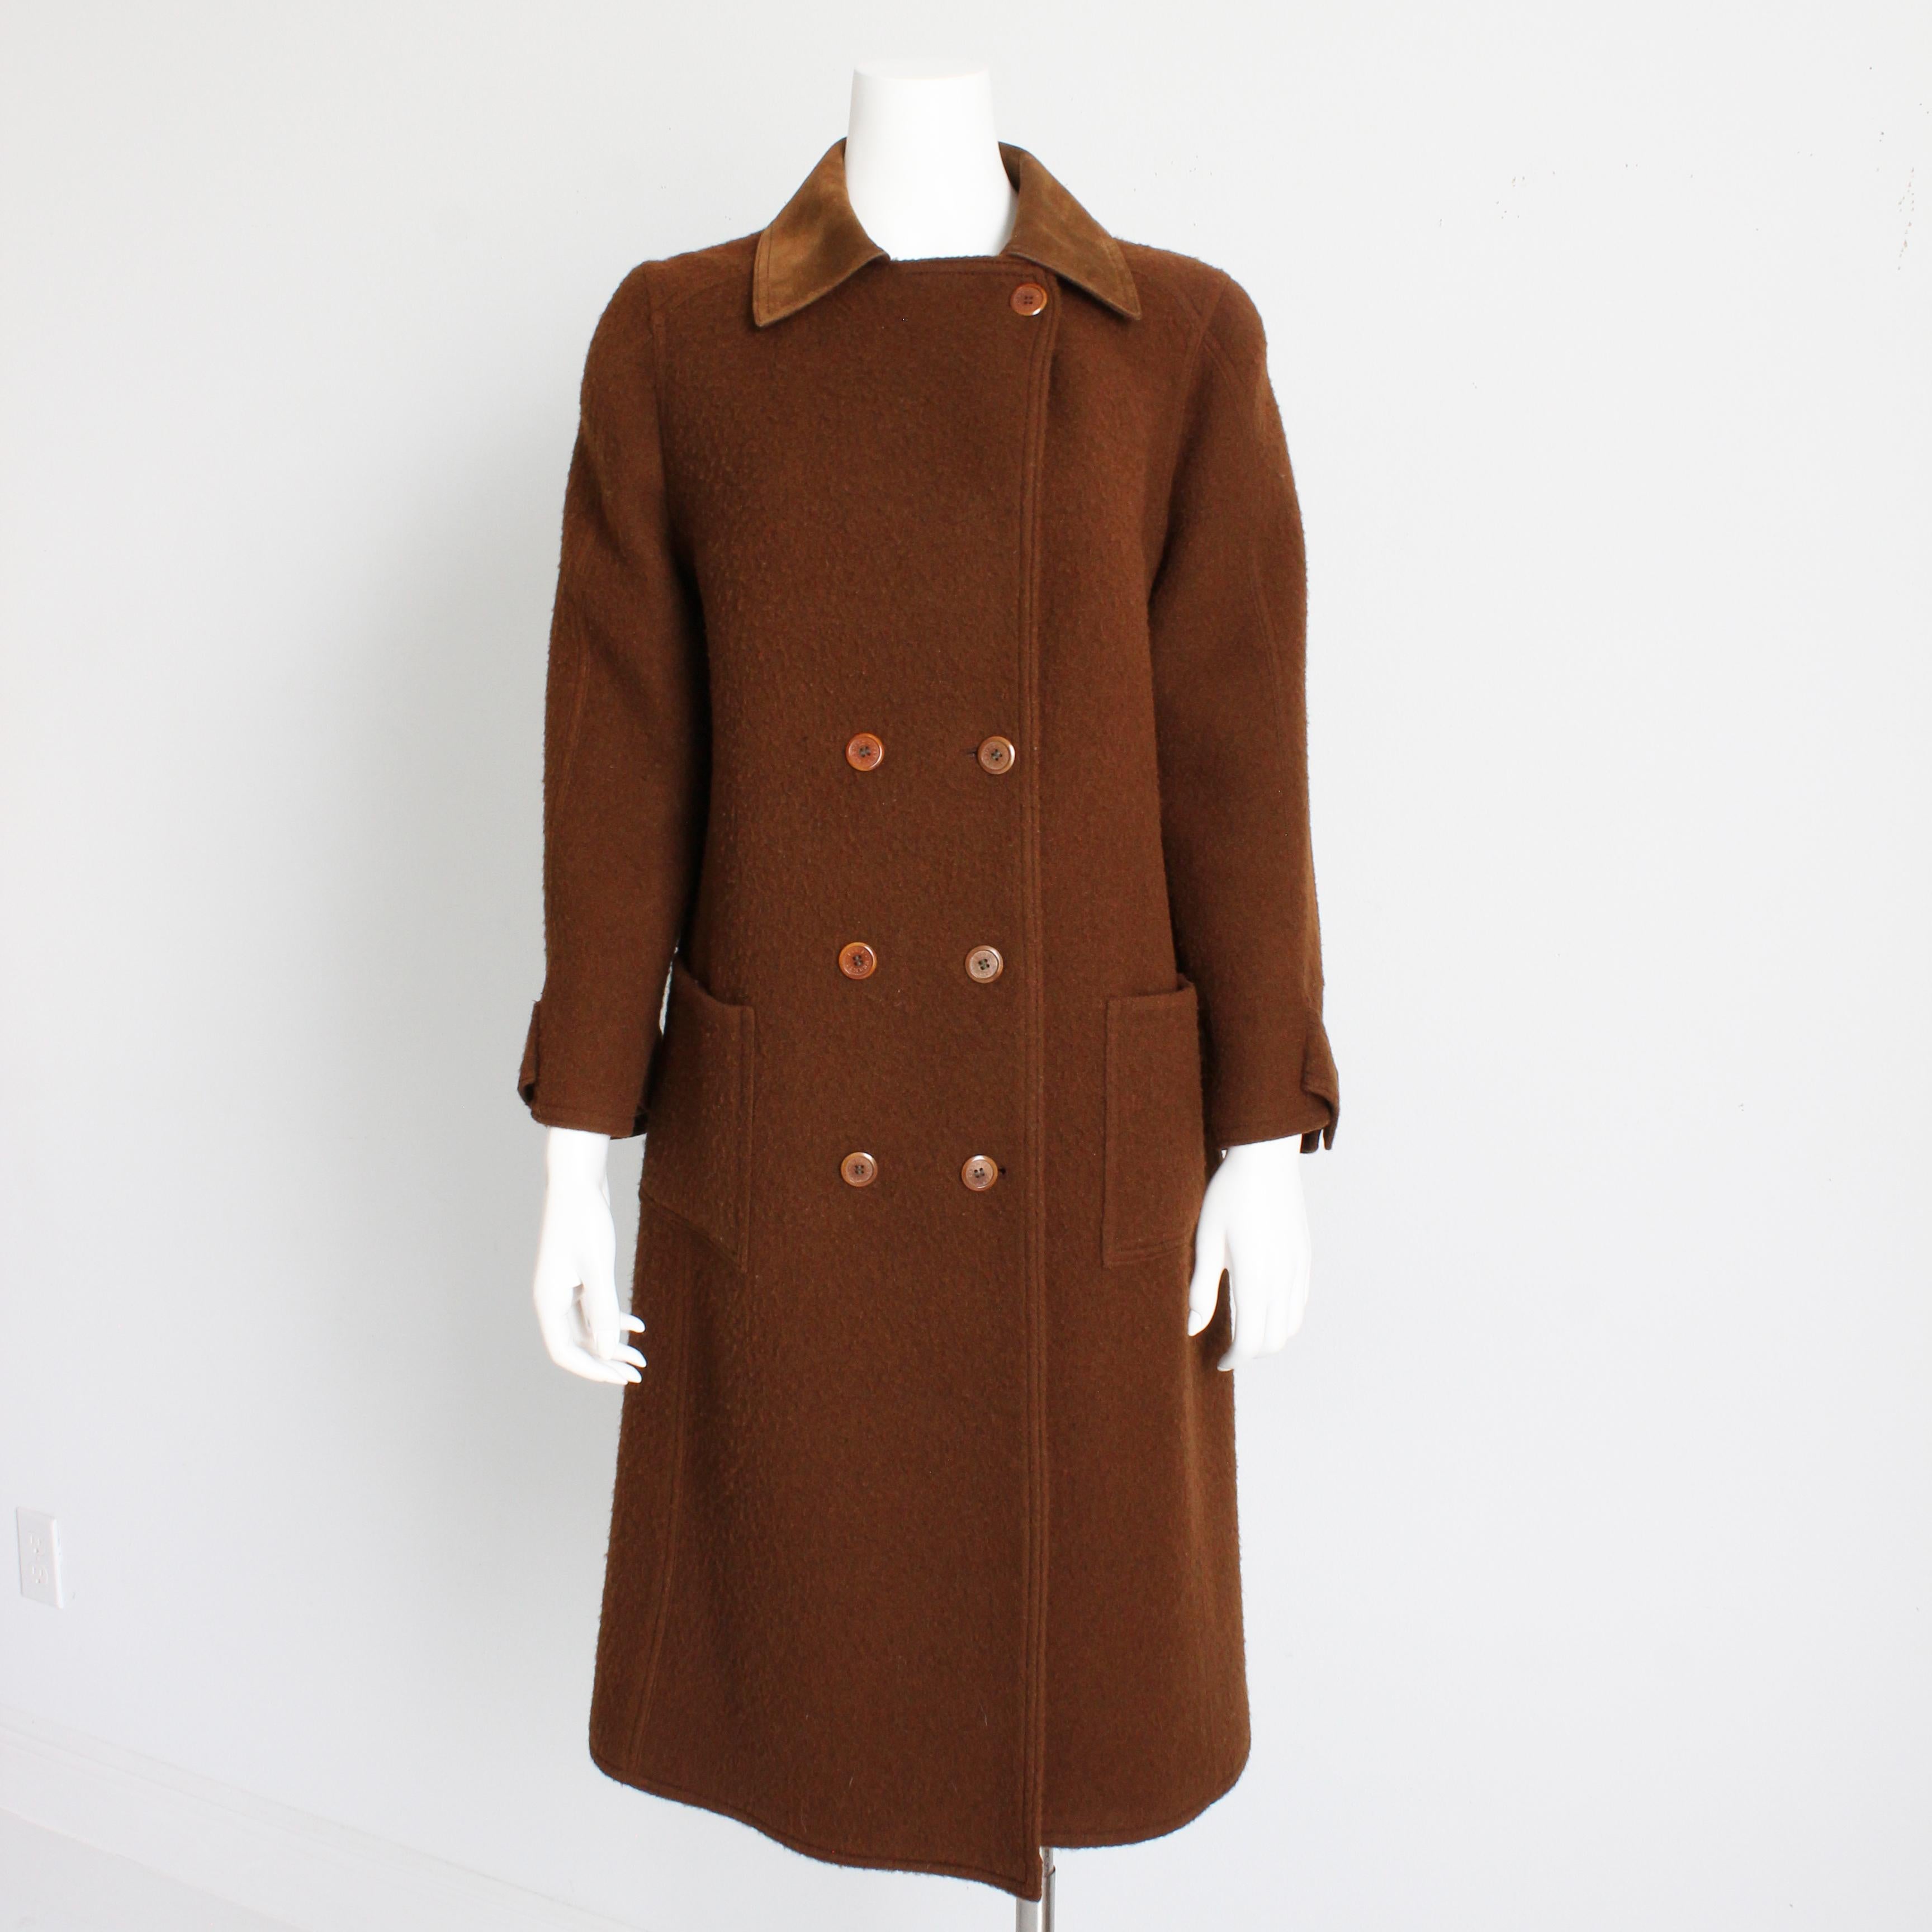 Women's Hermes Brown Double Breasted Suede Leather Trim Trench Style Wool Coat, 1970s For Sale